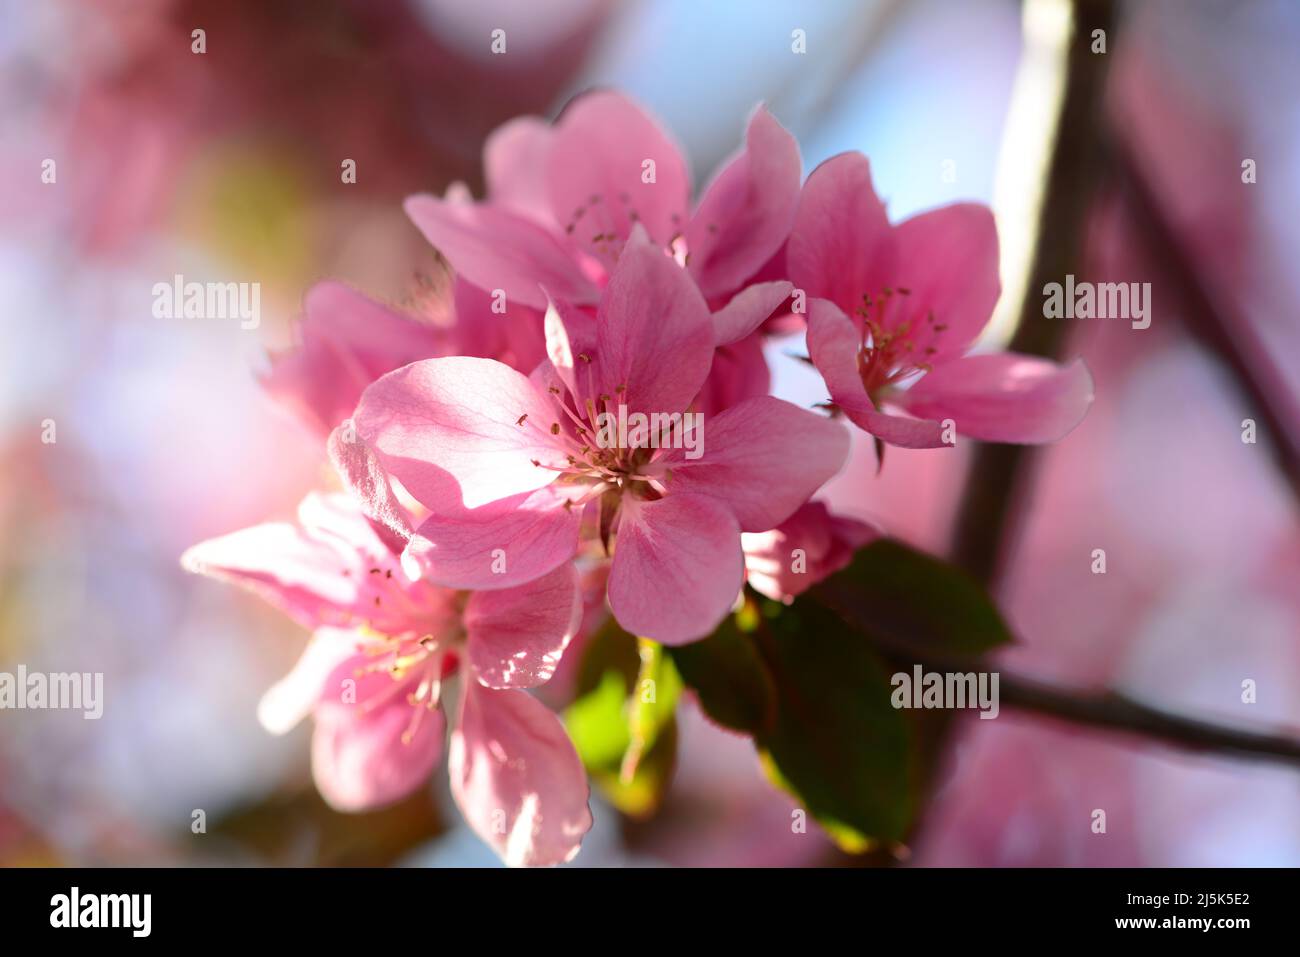 Pink flowering appletree as a close up Stock Photo